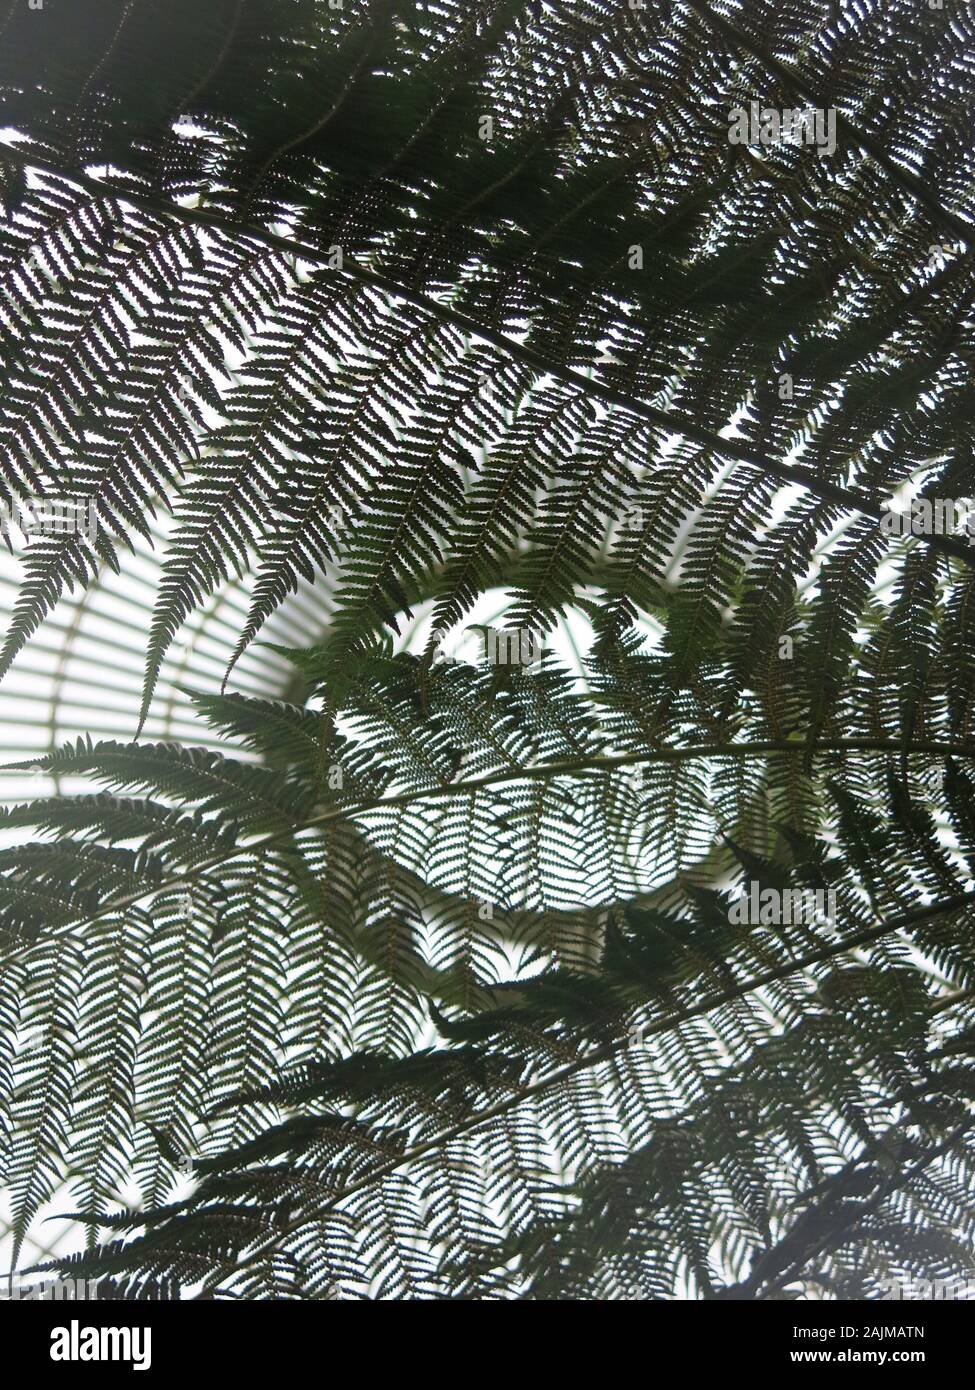 Abstract pattern looking up through fronds of tree fern foliage to the circular domed roof of the Kibble Palace glasshouse at Glasgow Botanic Gardens. Stock Photo